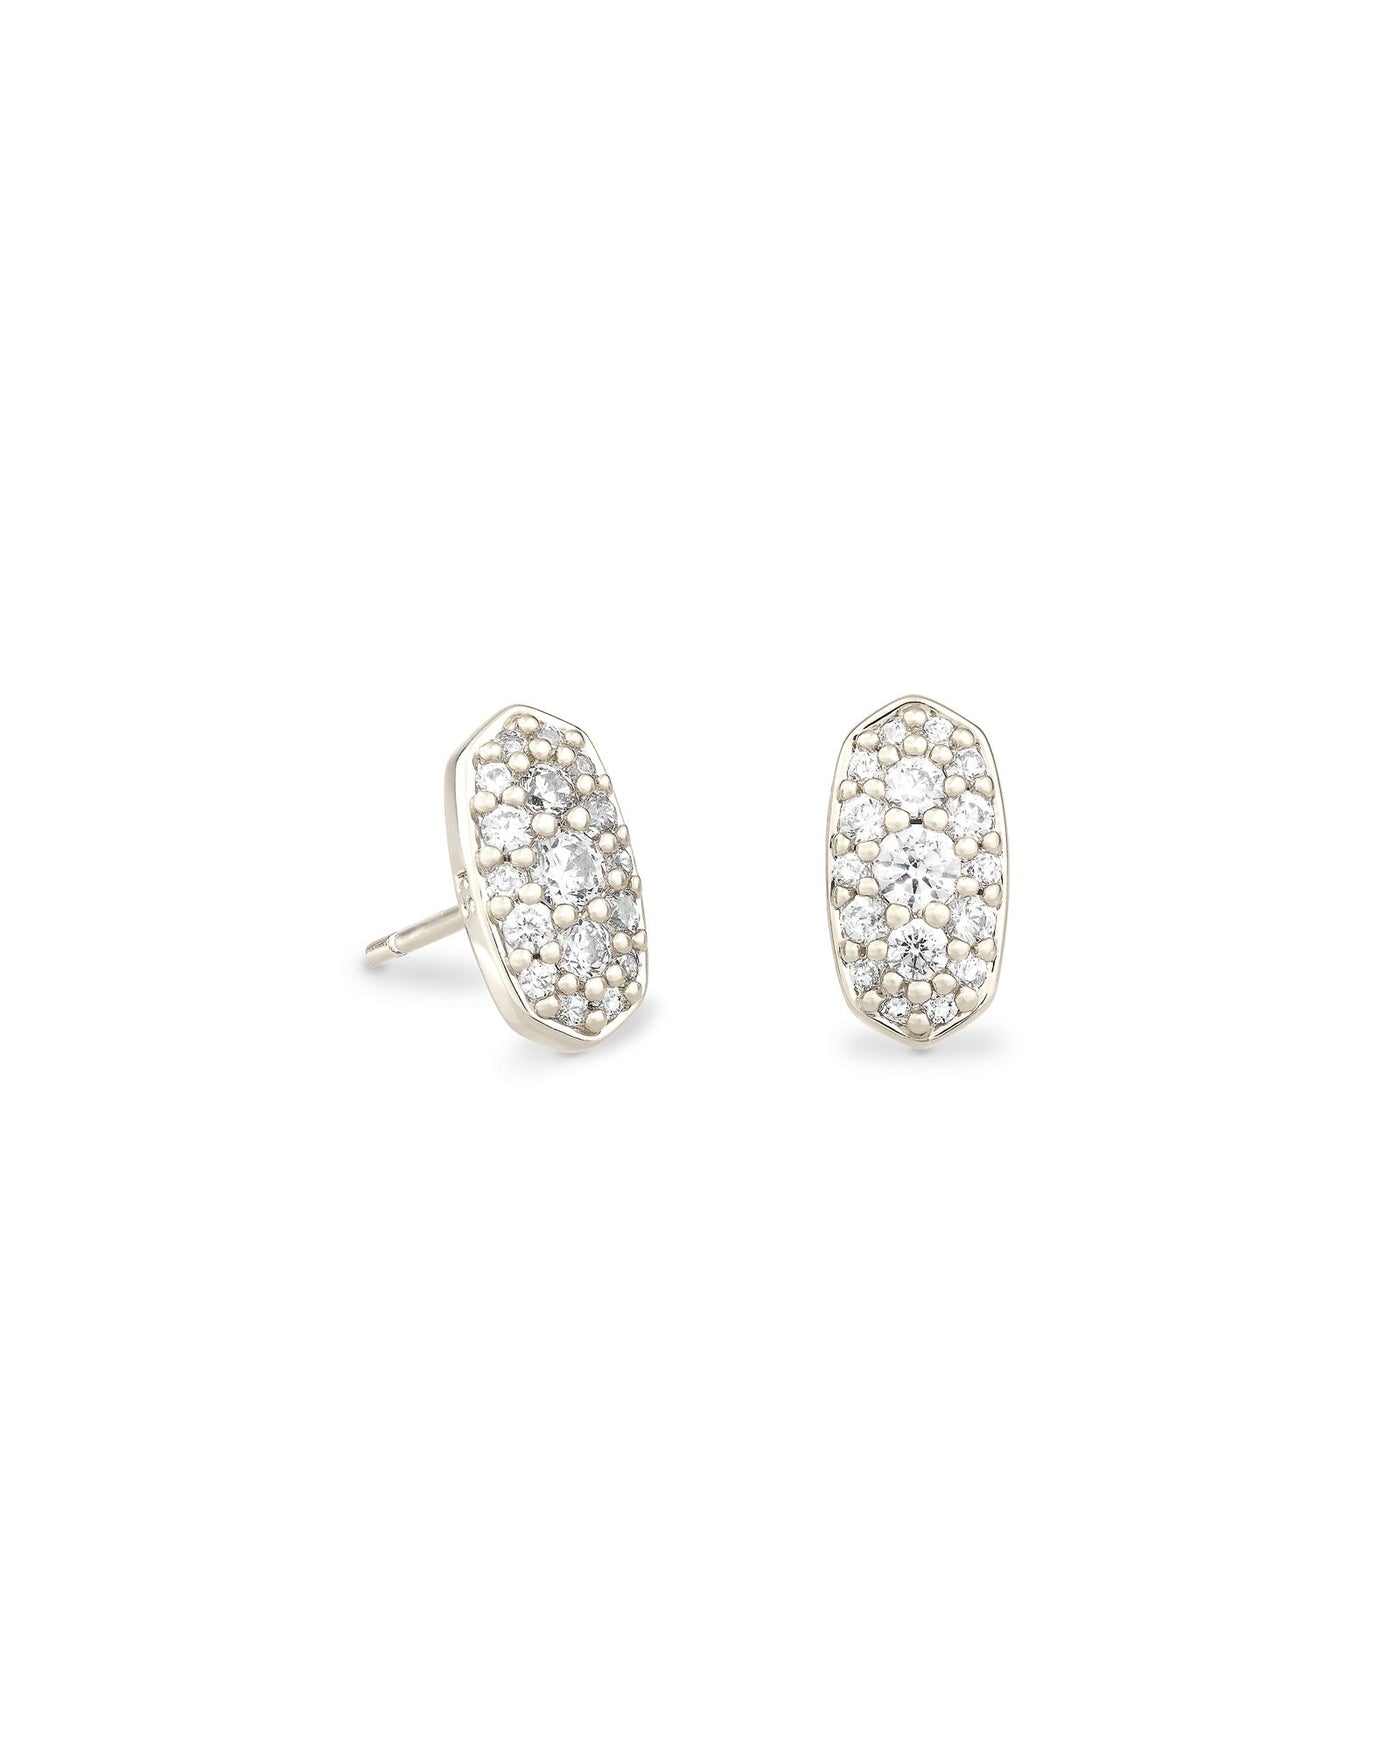 Kendra Scott Grayson Silver Stud Earrings in White Crystal-Earrings-Kendra Scott-Market Street Nest, Fashionable Clothing, Shoes and Home Décor Located in Mabank, TX